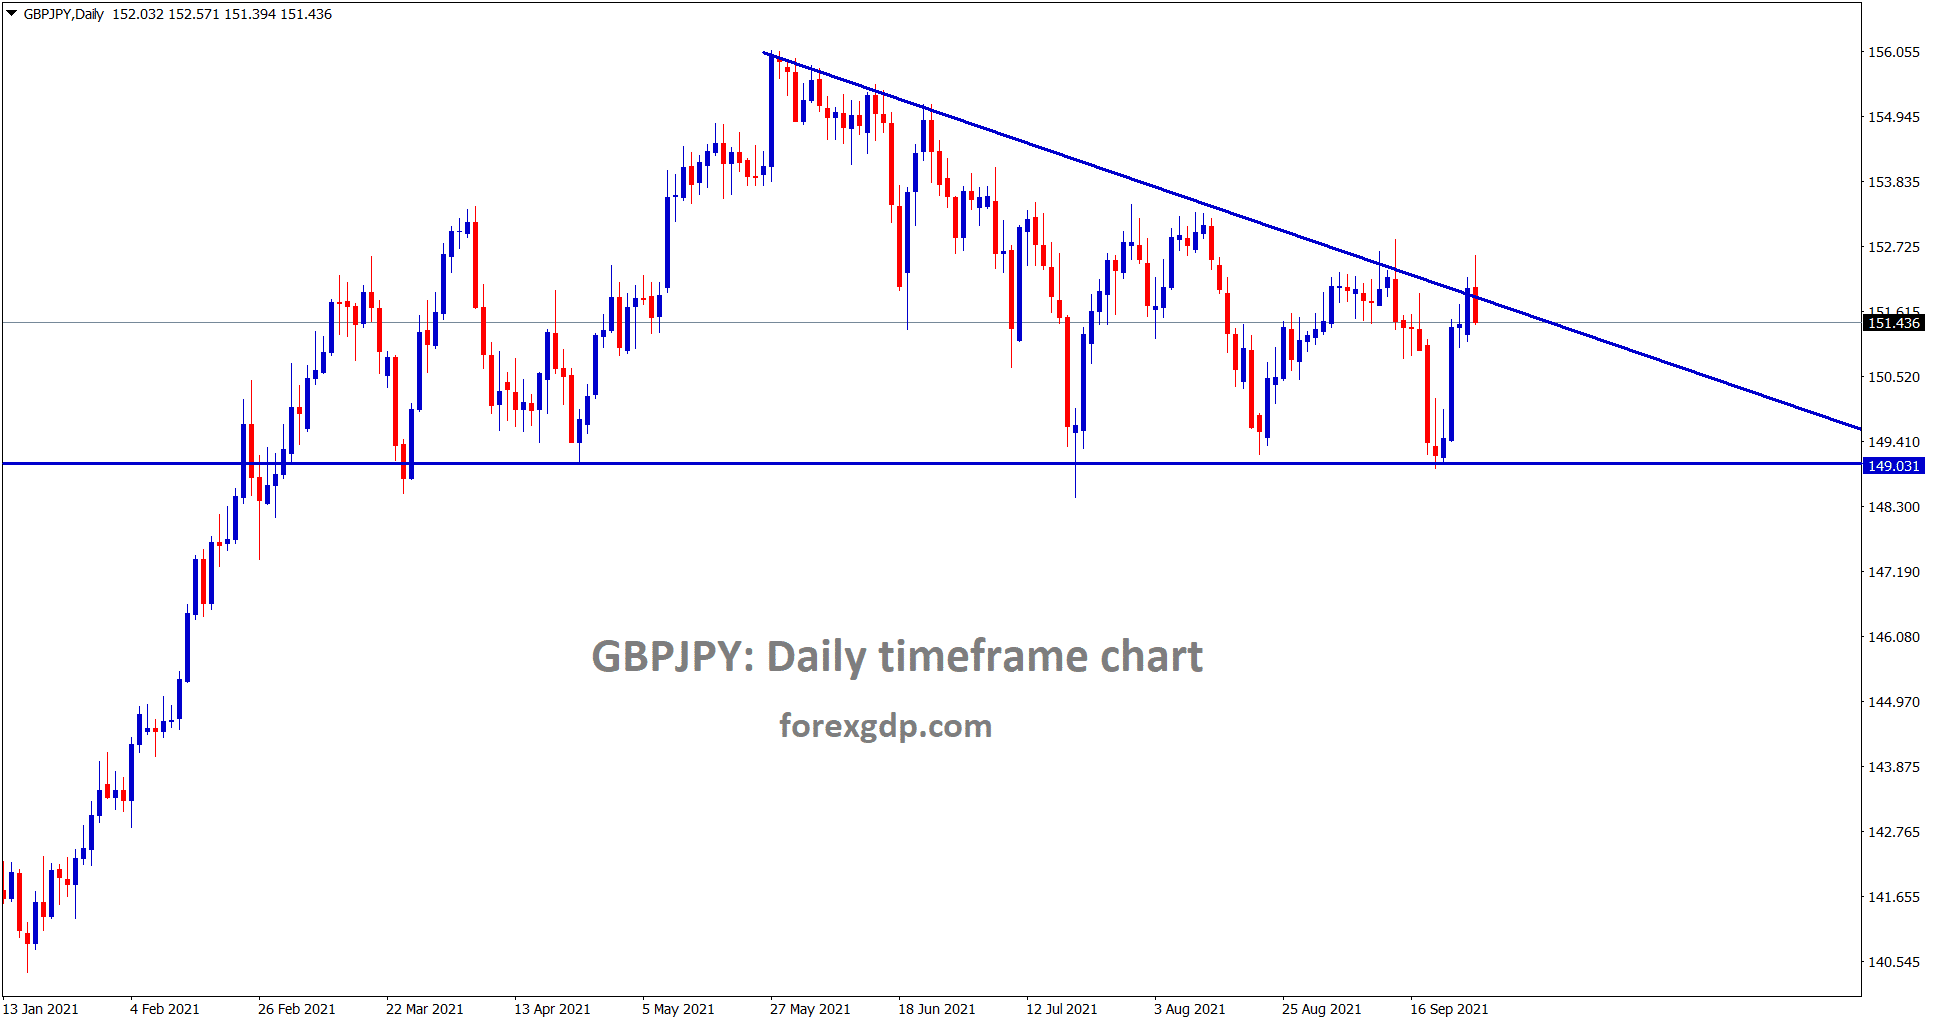 GBPJPY is making a correction from the lower high area of the Descending Triangle pattern